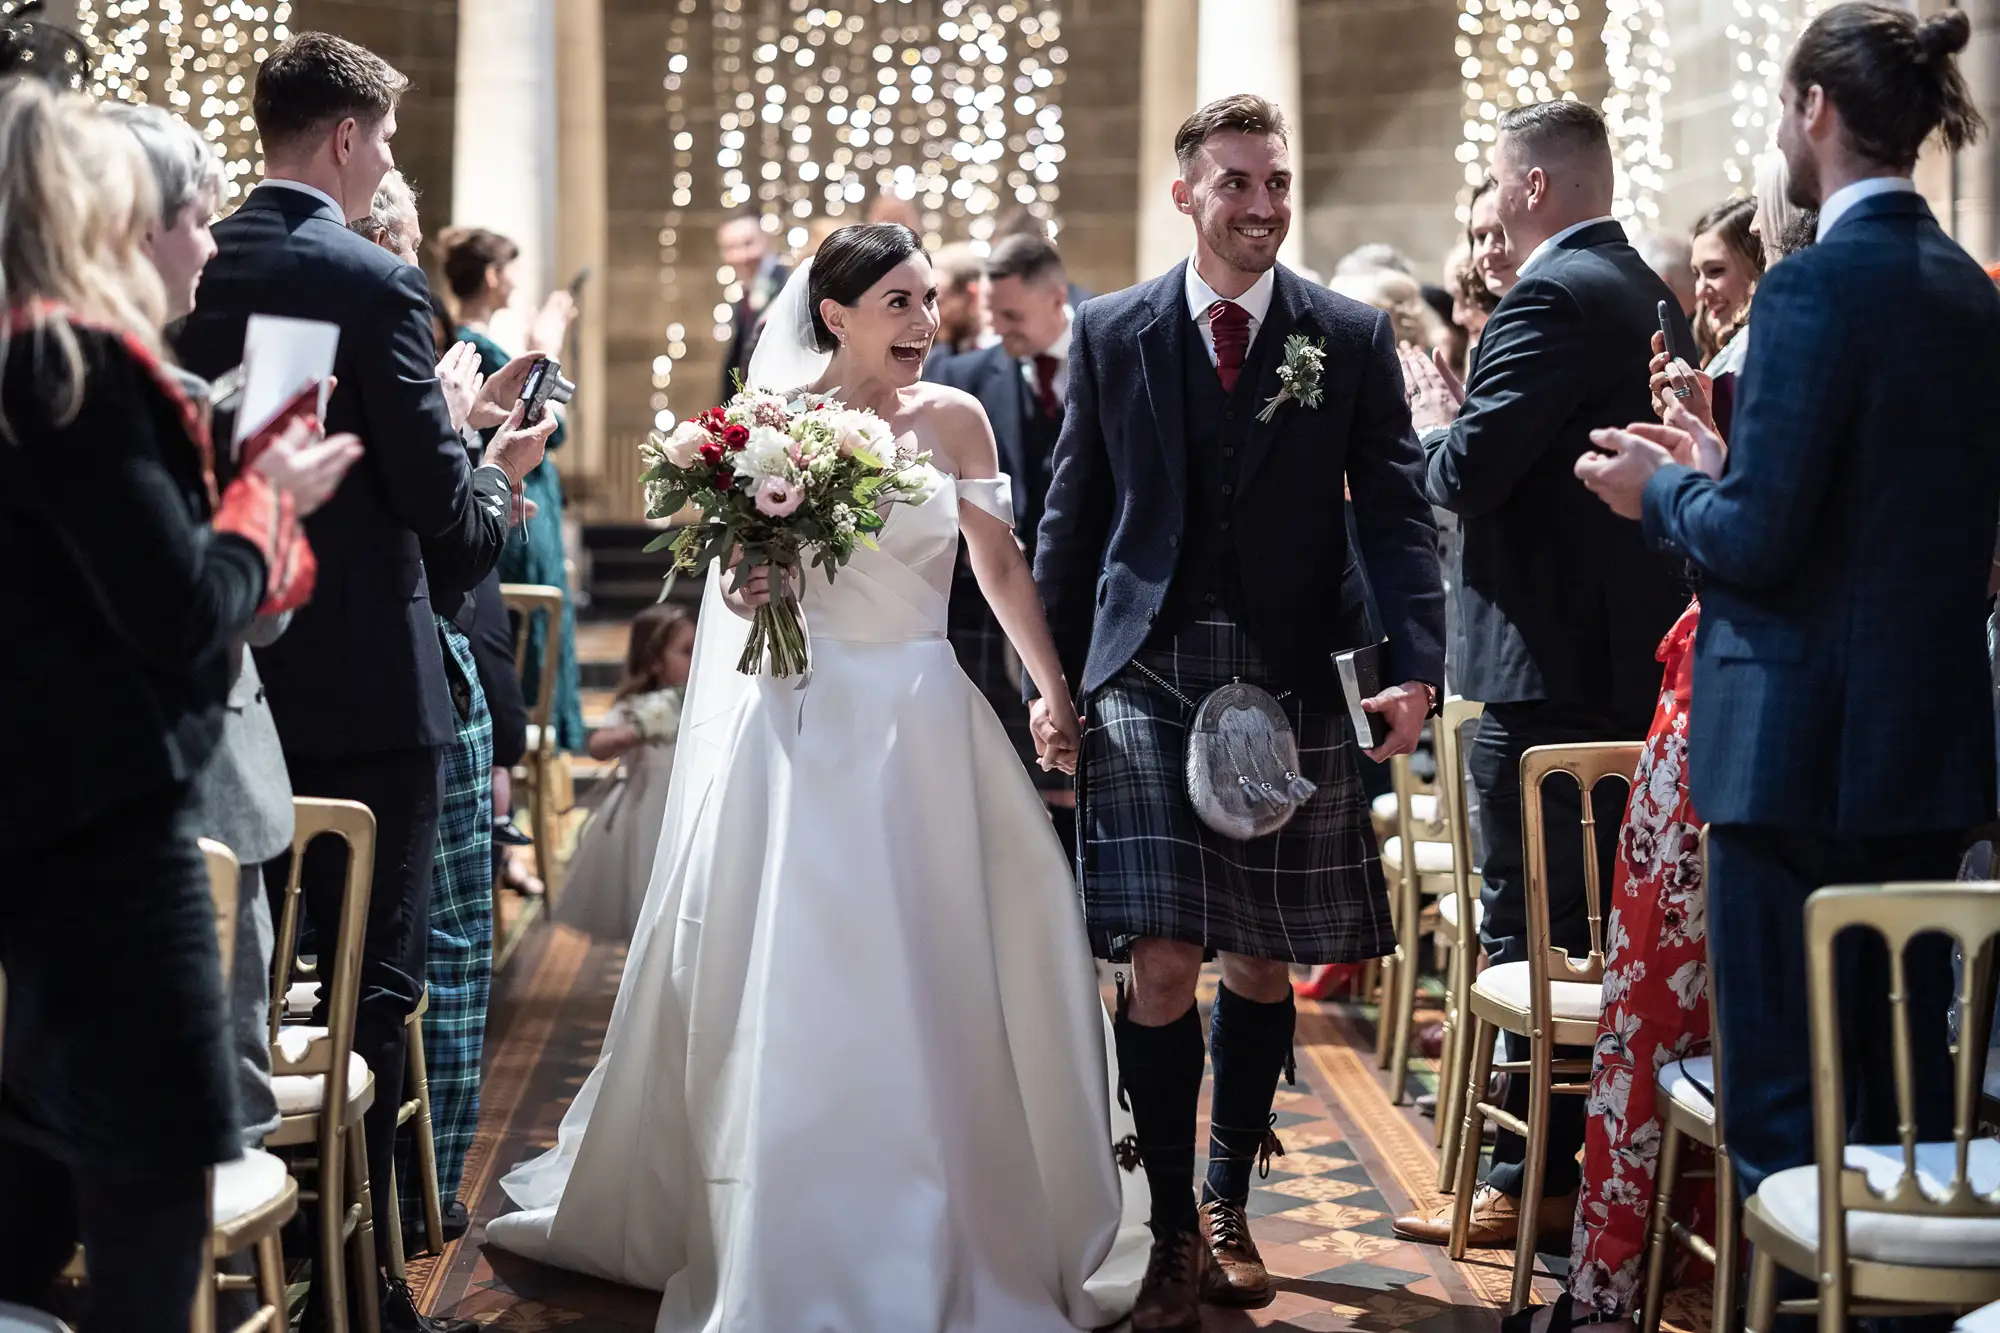 A bride and groom smiling as they walk through a wedding aisle, surrounded by applauding guests, the groom wearing a kilt and the bride holding a bouquet.